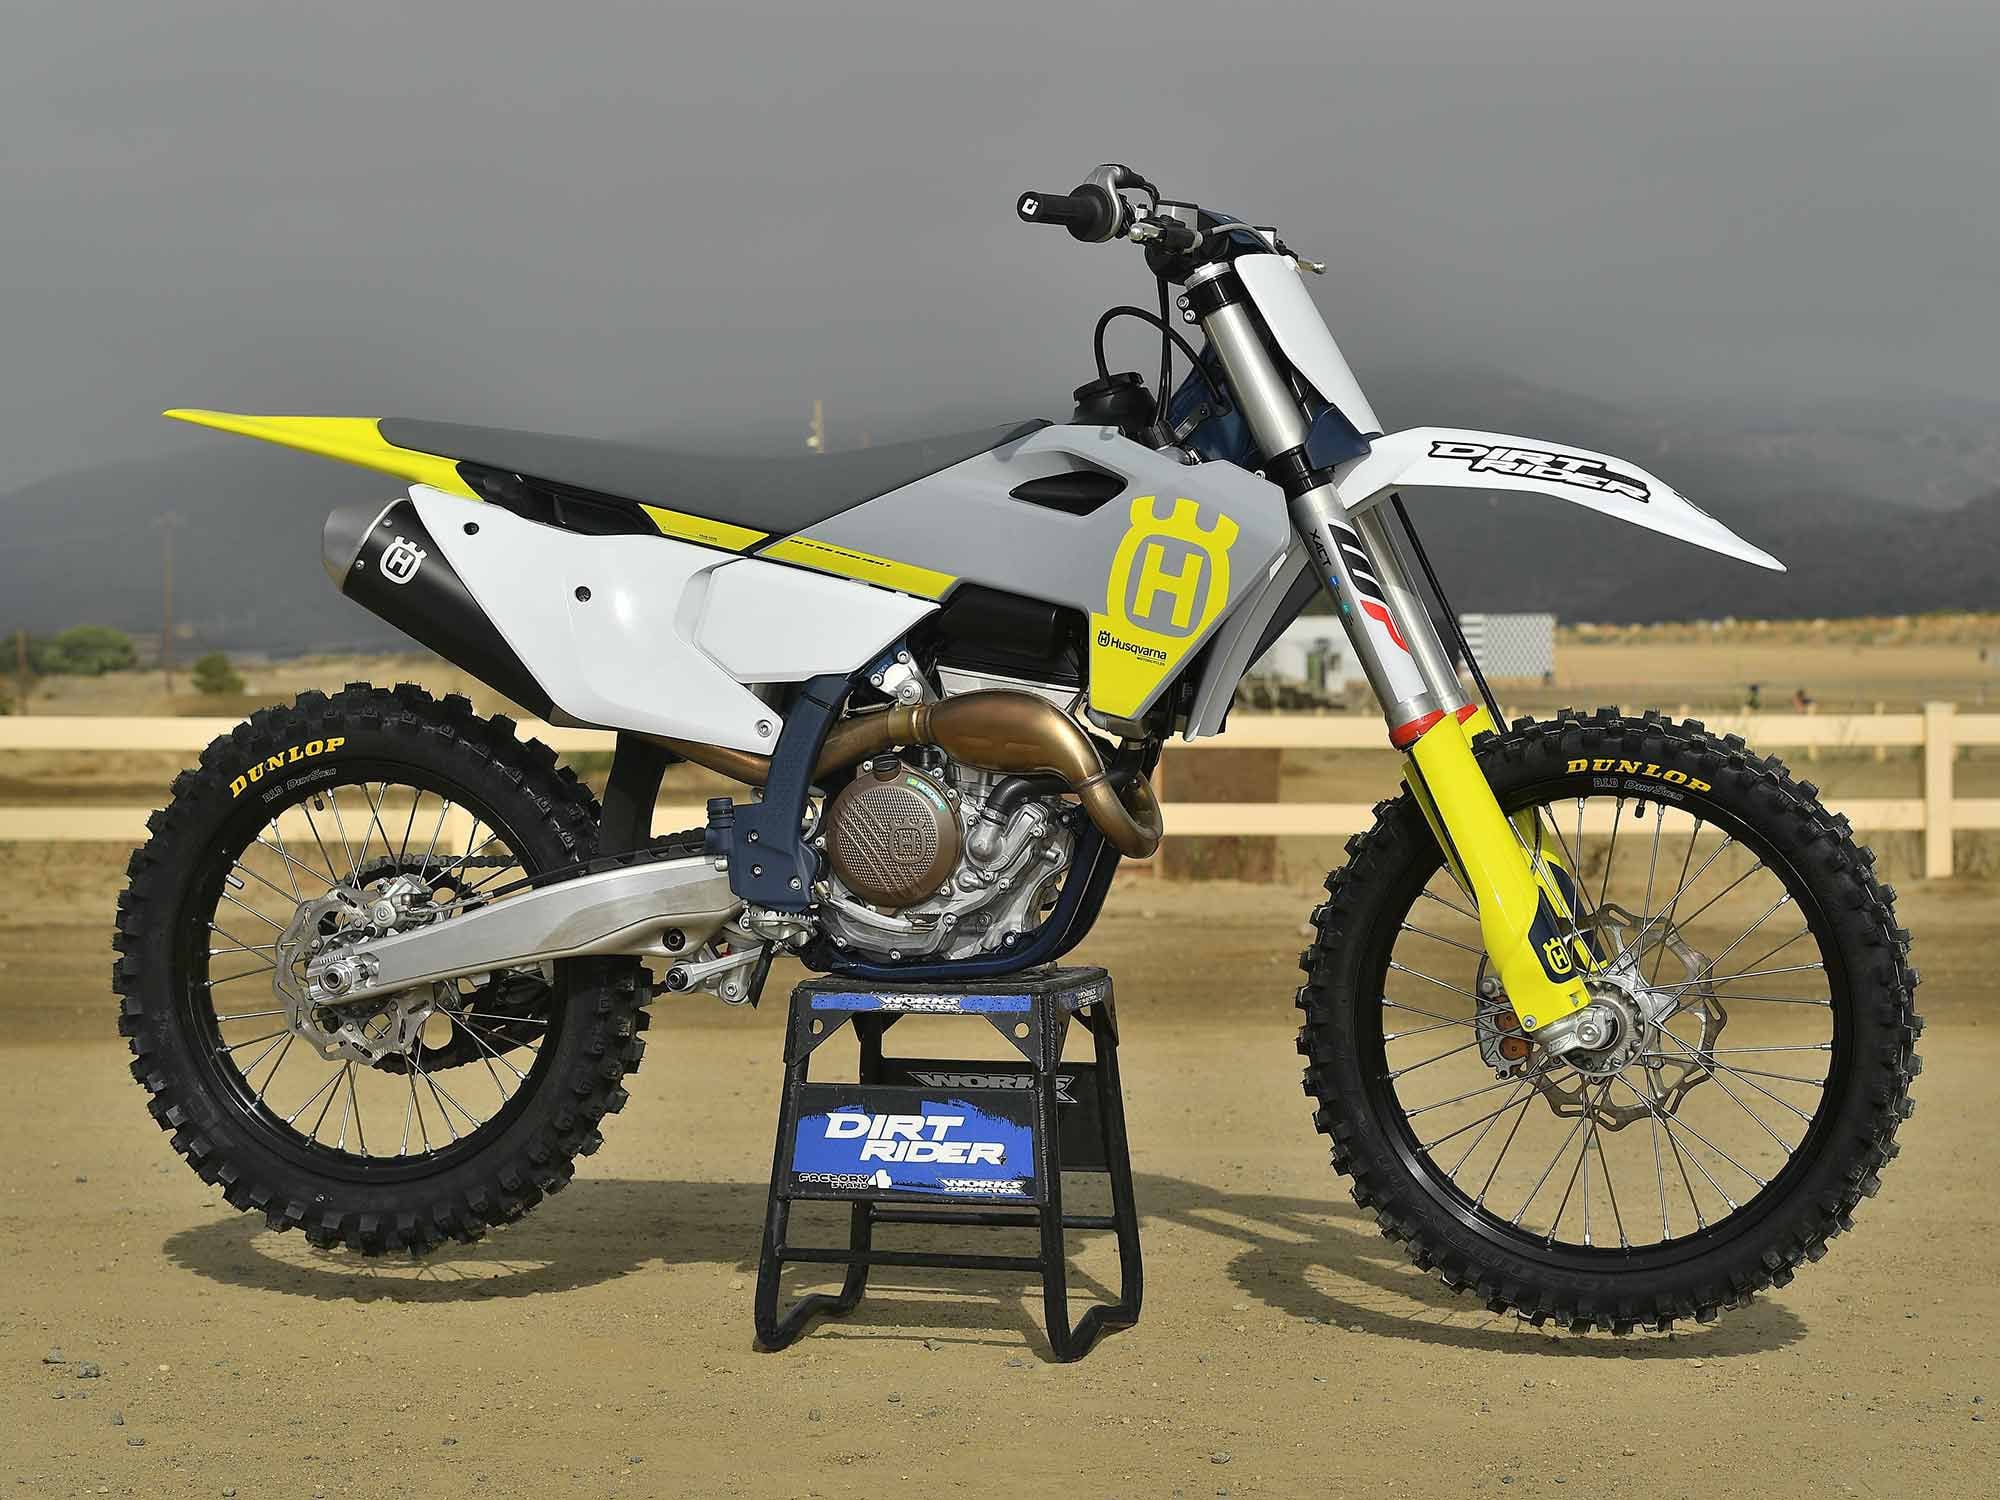 With its new color scheme, bodywork, and engine, there’s no mistaking the 2023 Husqvarna FC 250.